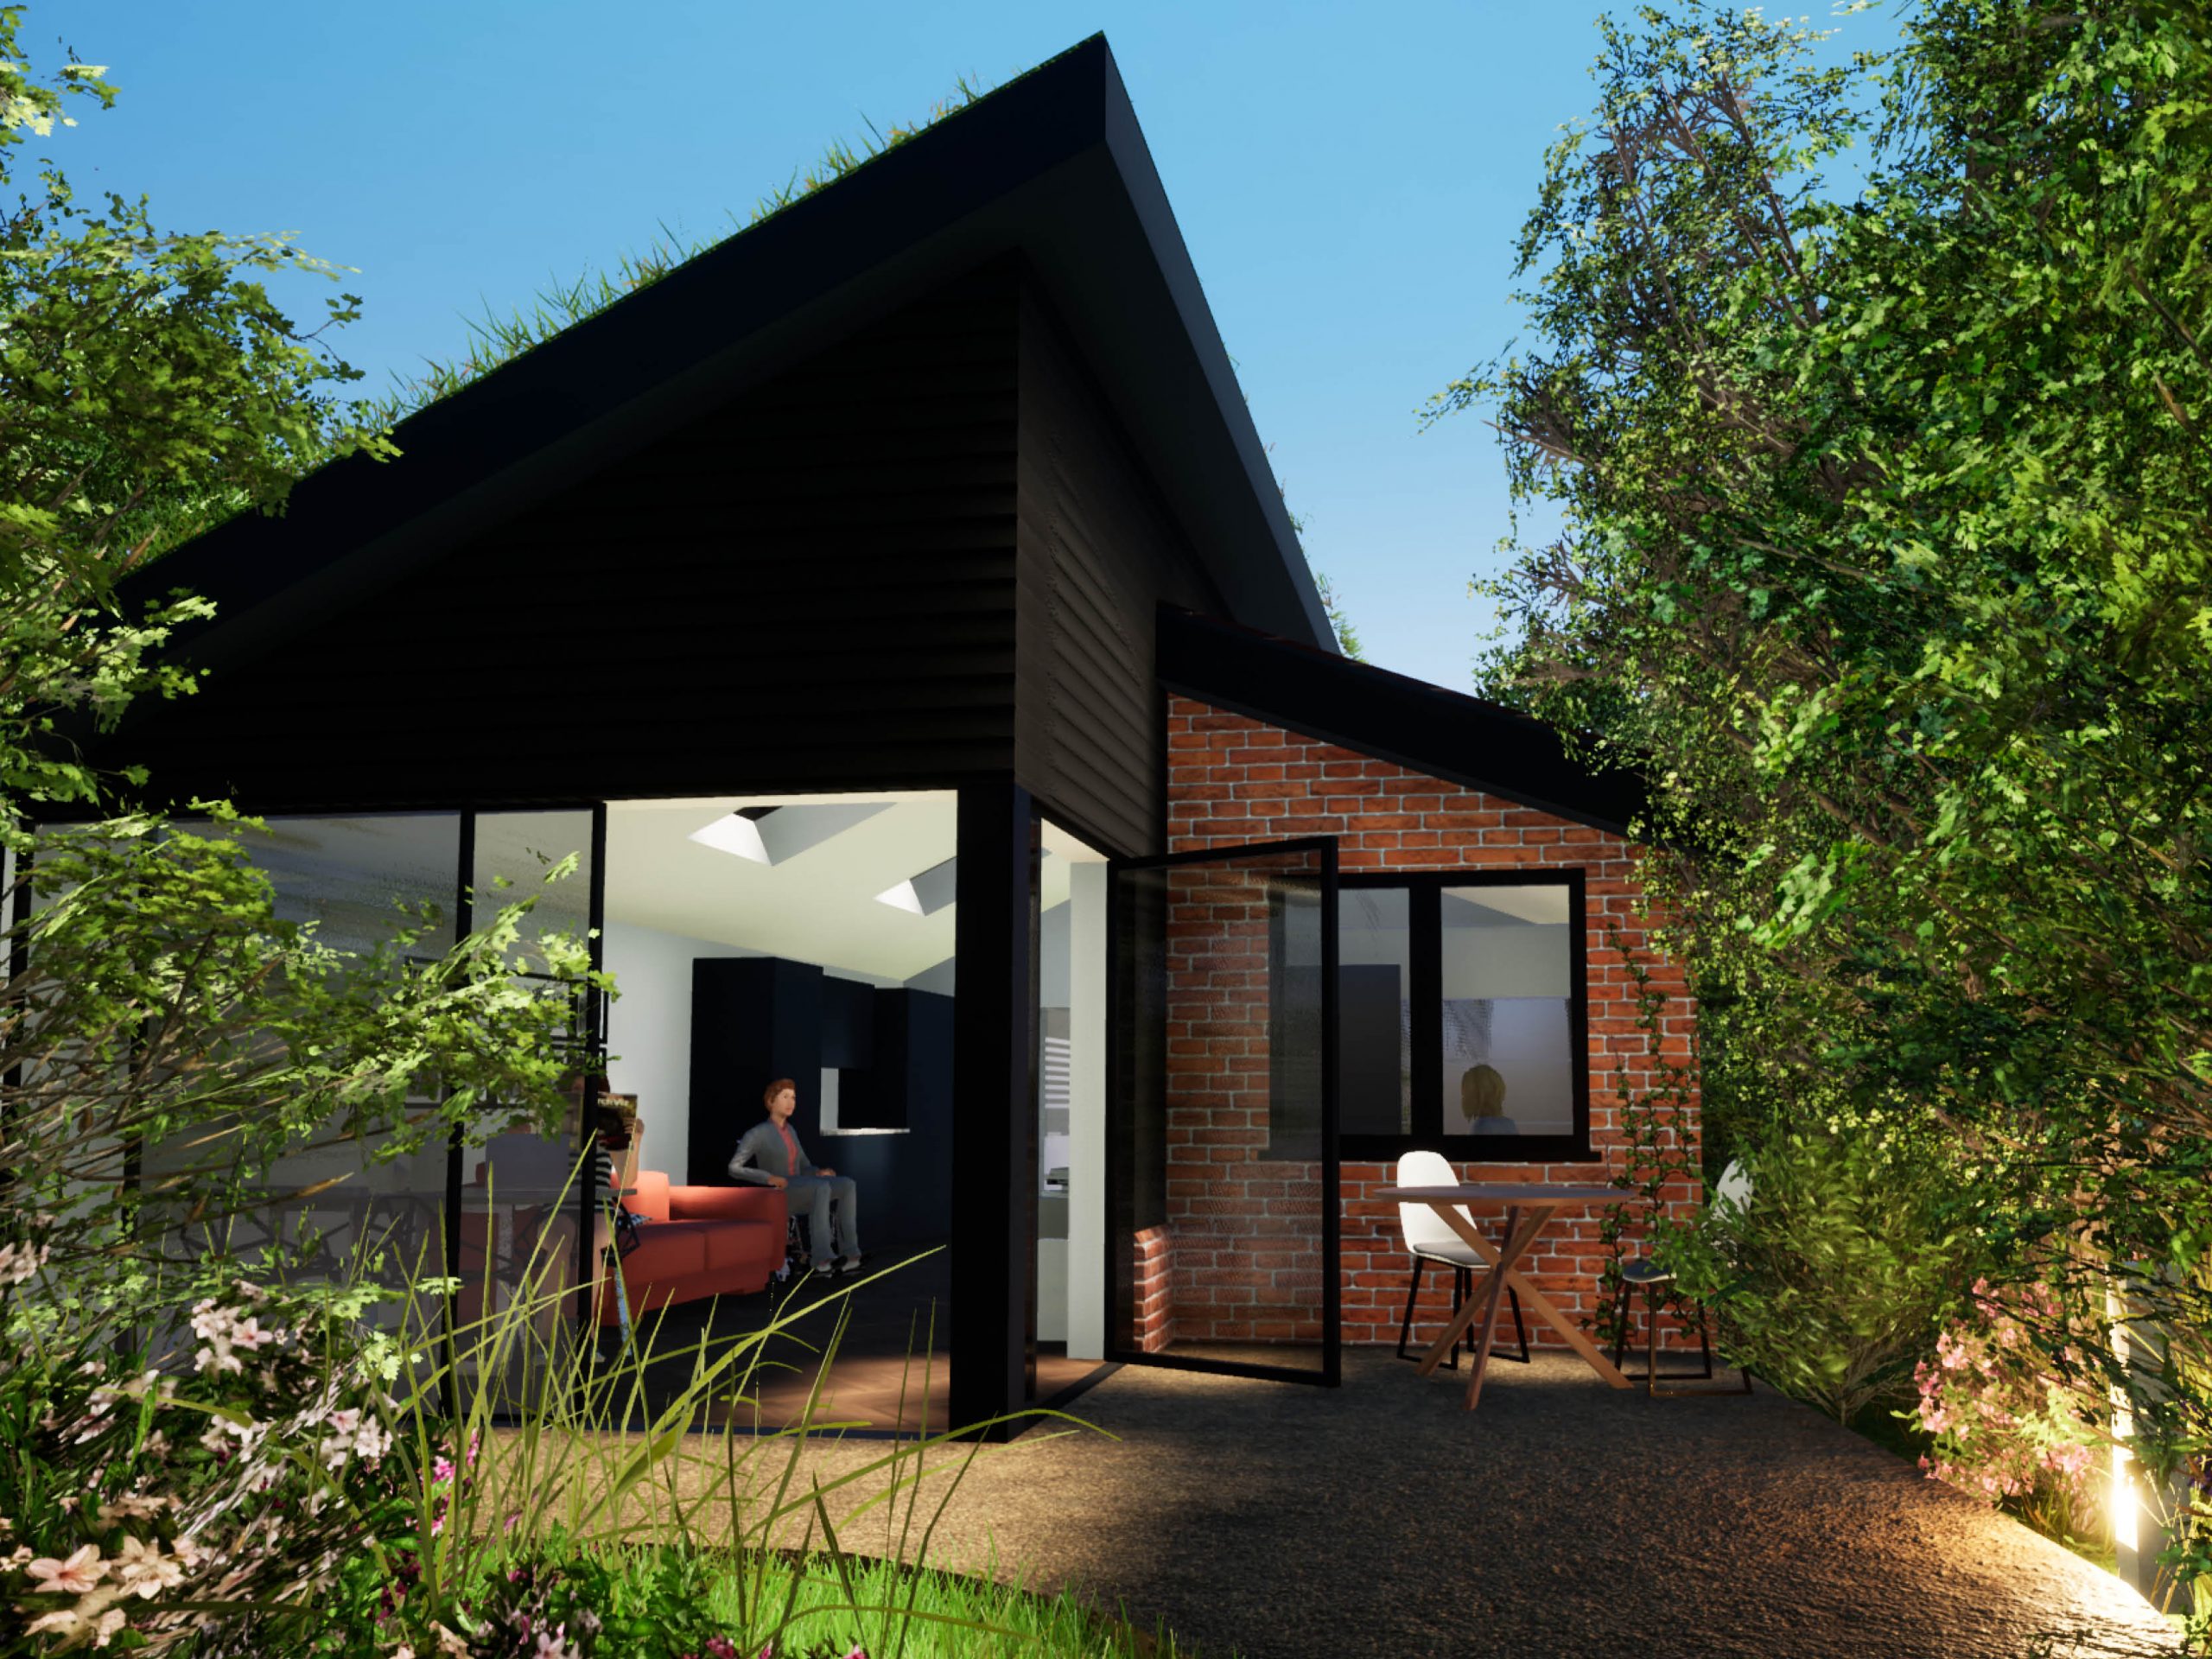 Outbuilding North London ES Architecture This project was designed to create an end of garden out building in North London. The space offers a relaxing environment for the client, utilising traditional and modern architecture nestled within a woodland surrounding.